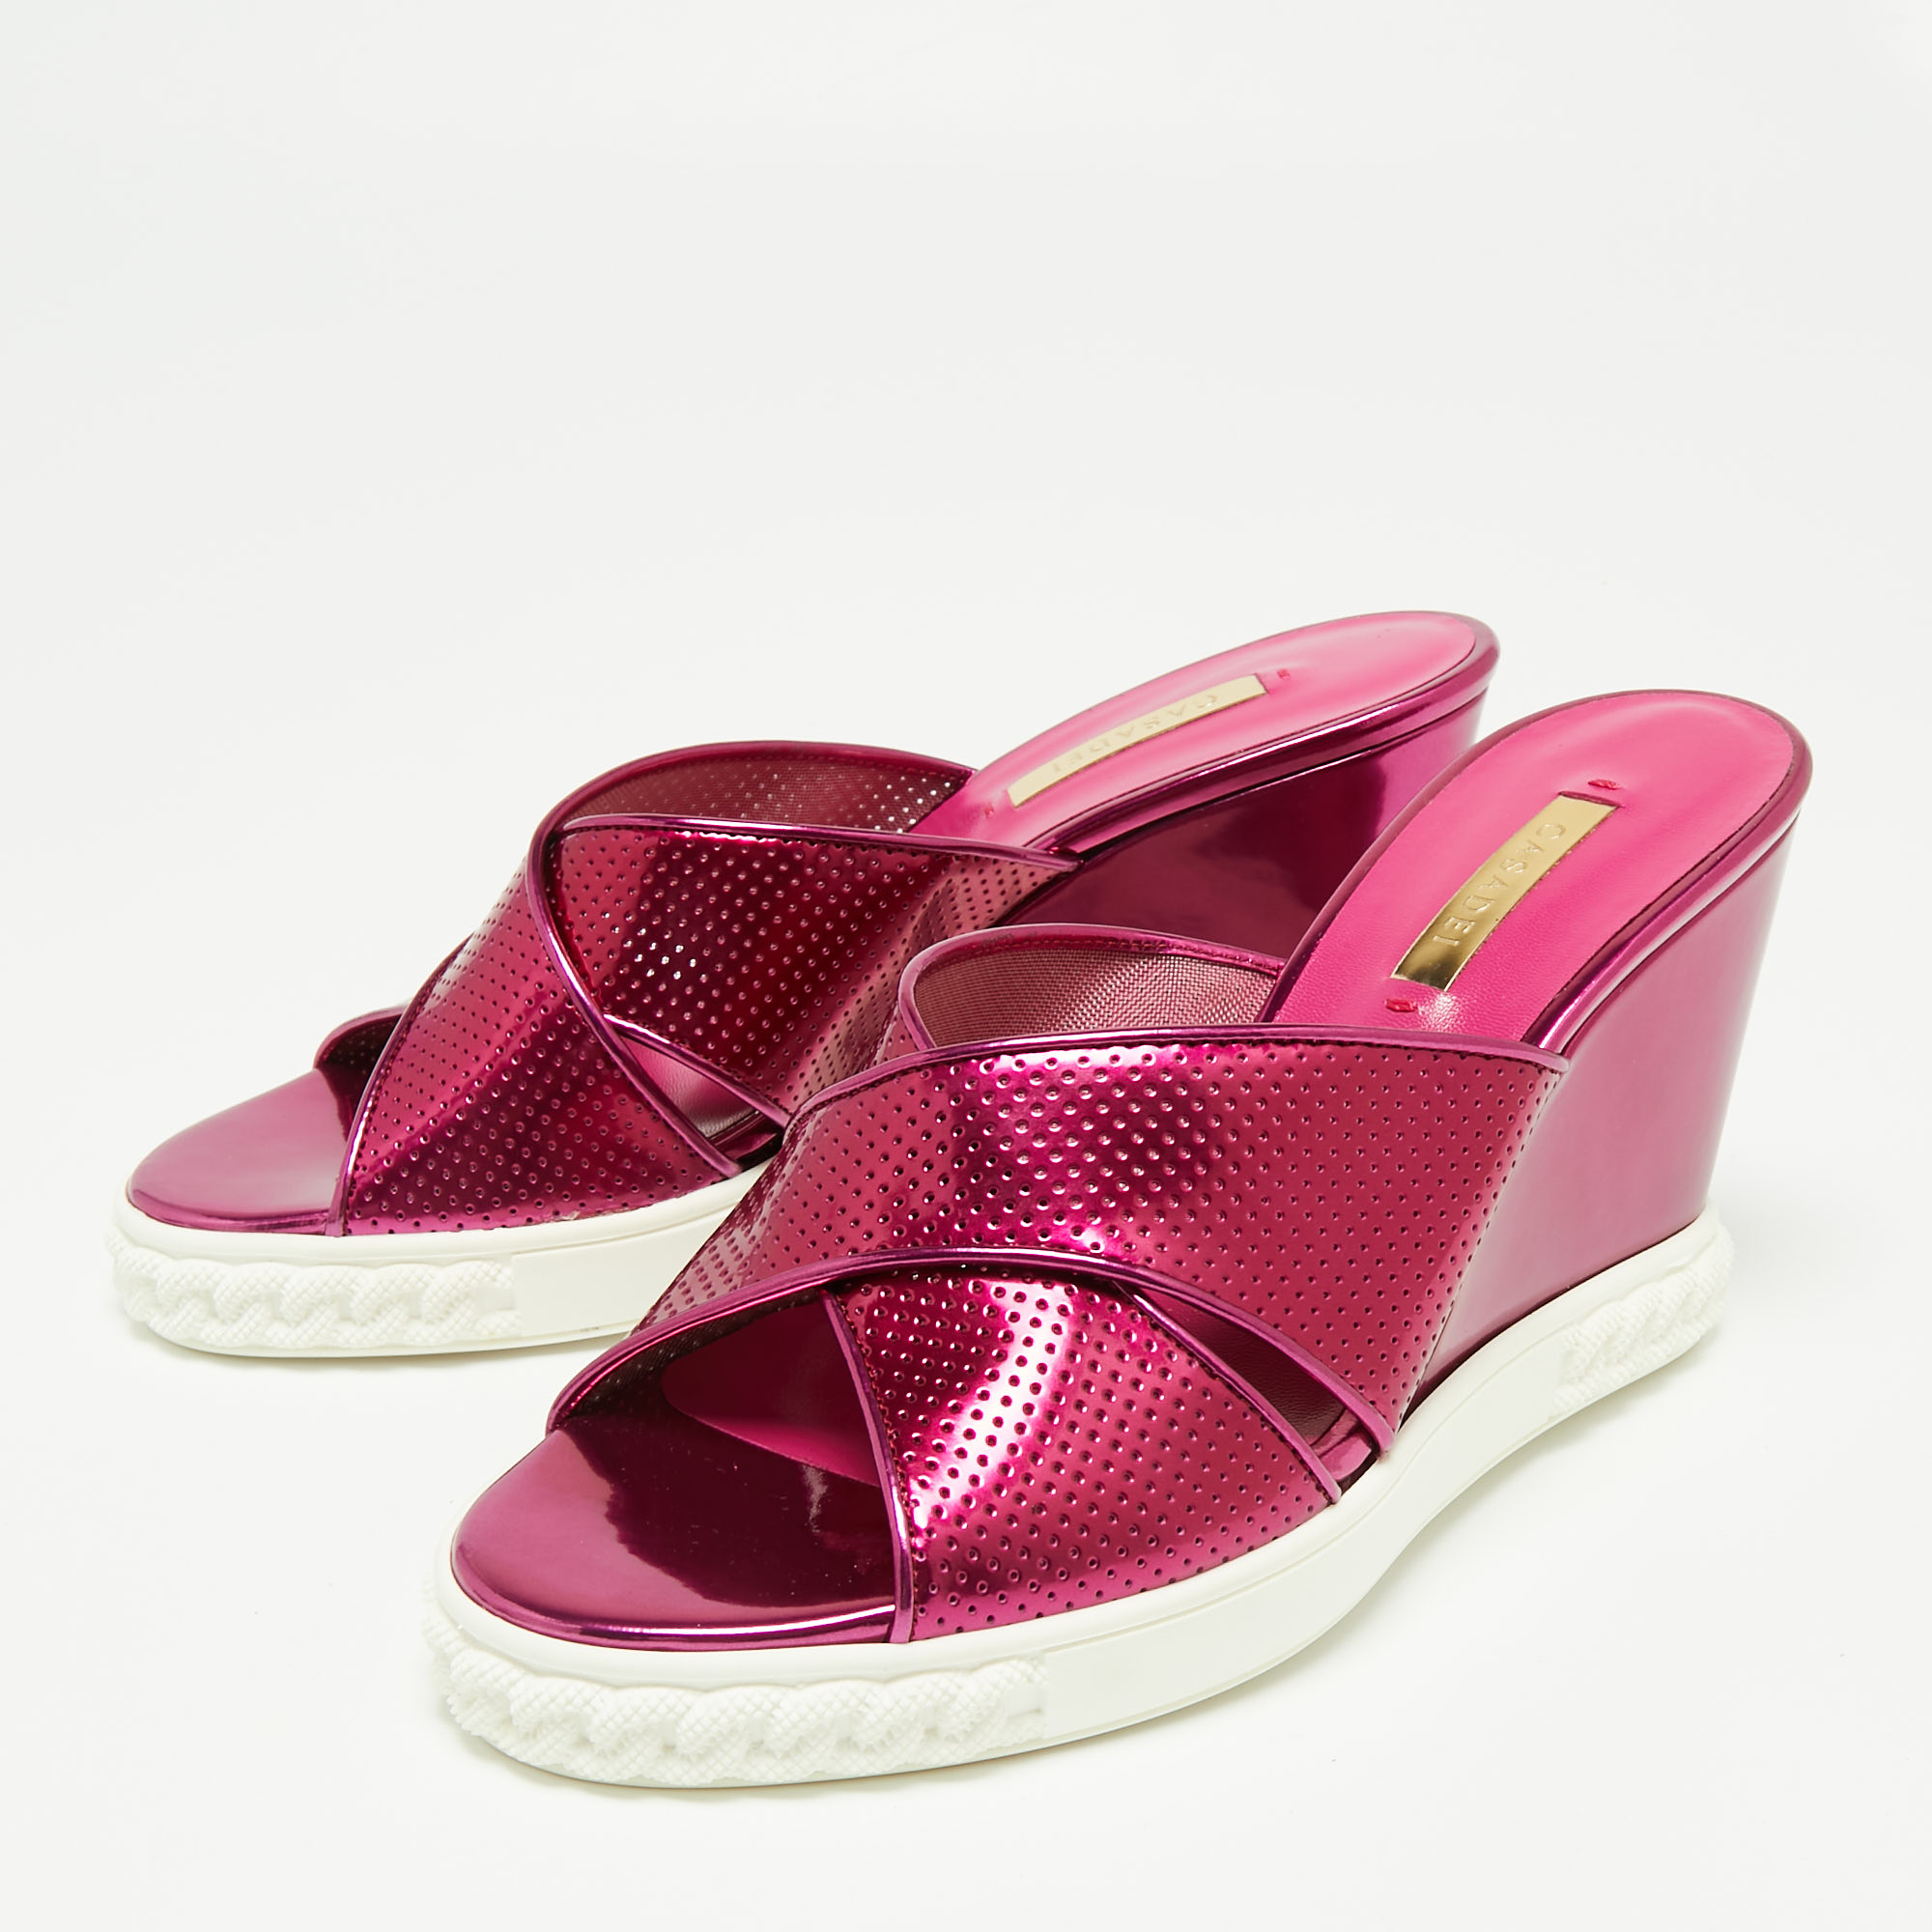 

Casadei Pink Perforated Patent Leather Wedge Slide Sandals Size